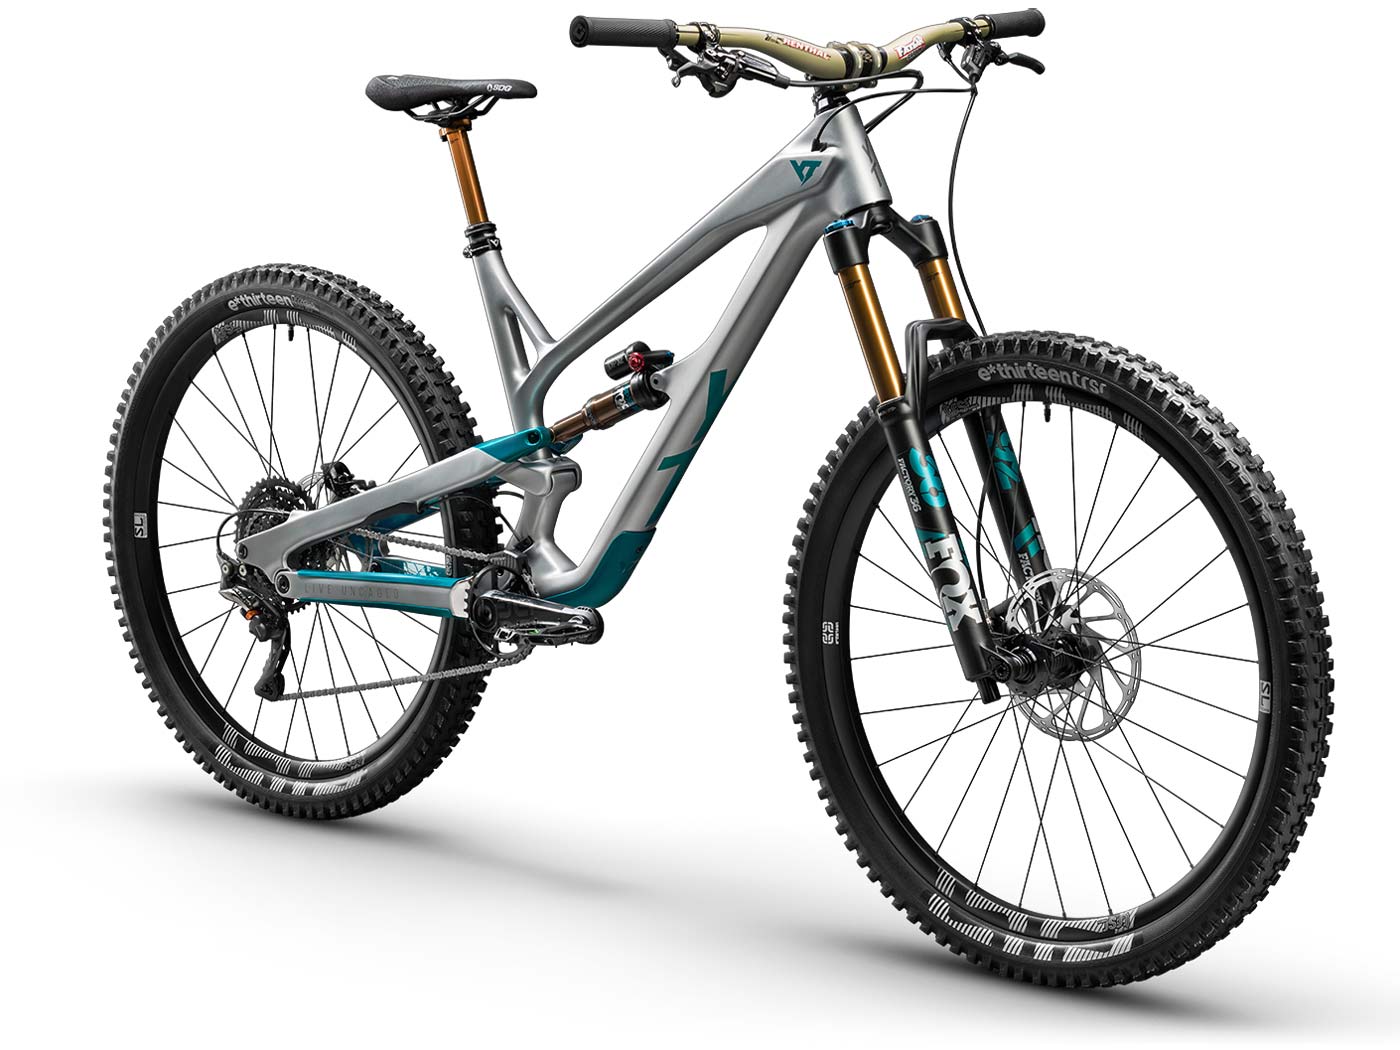 2019 YT Jeffsey all-new again, all-mountain trail bike